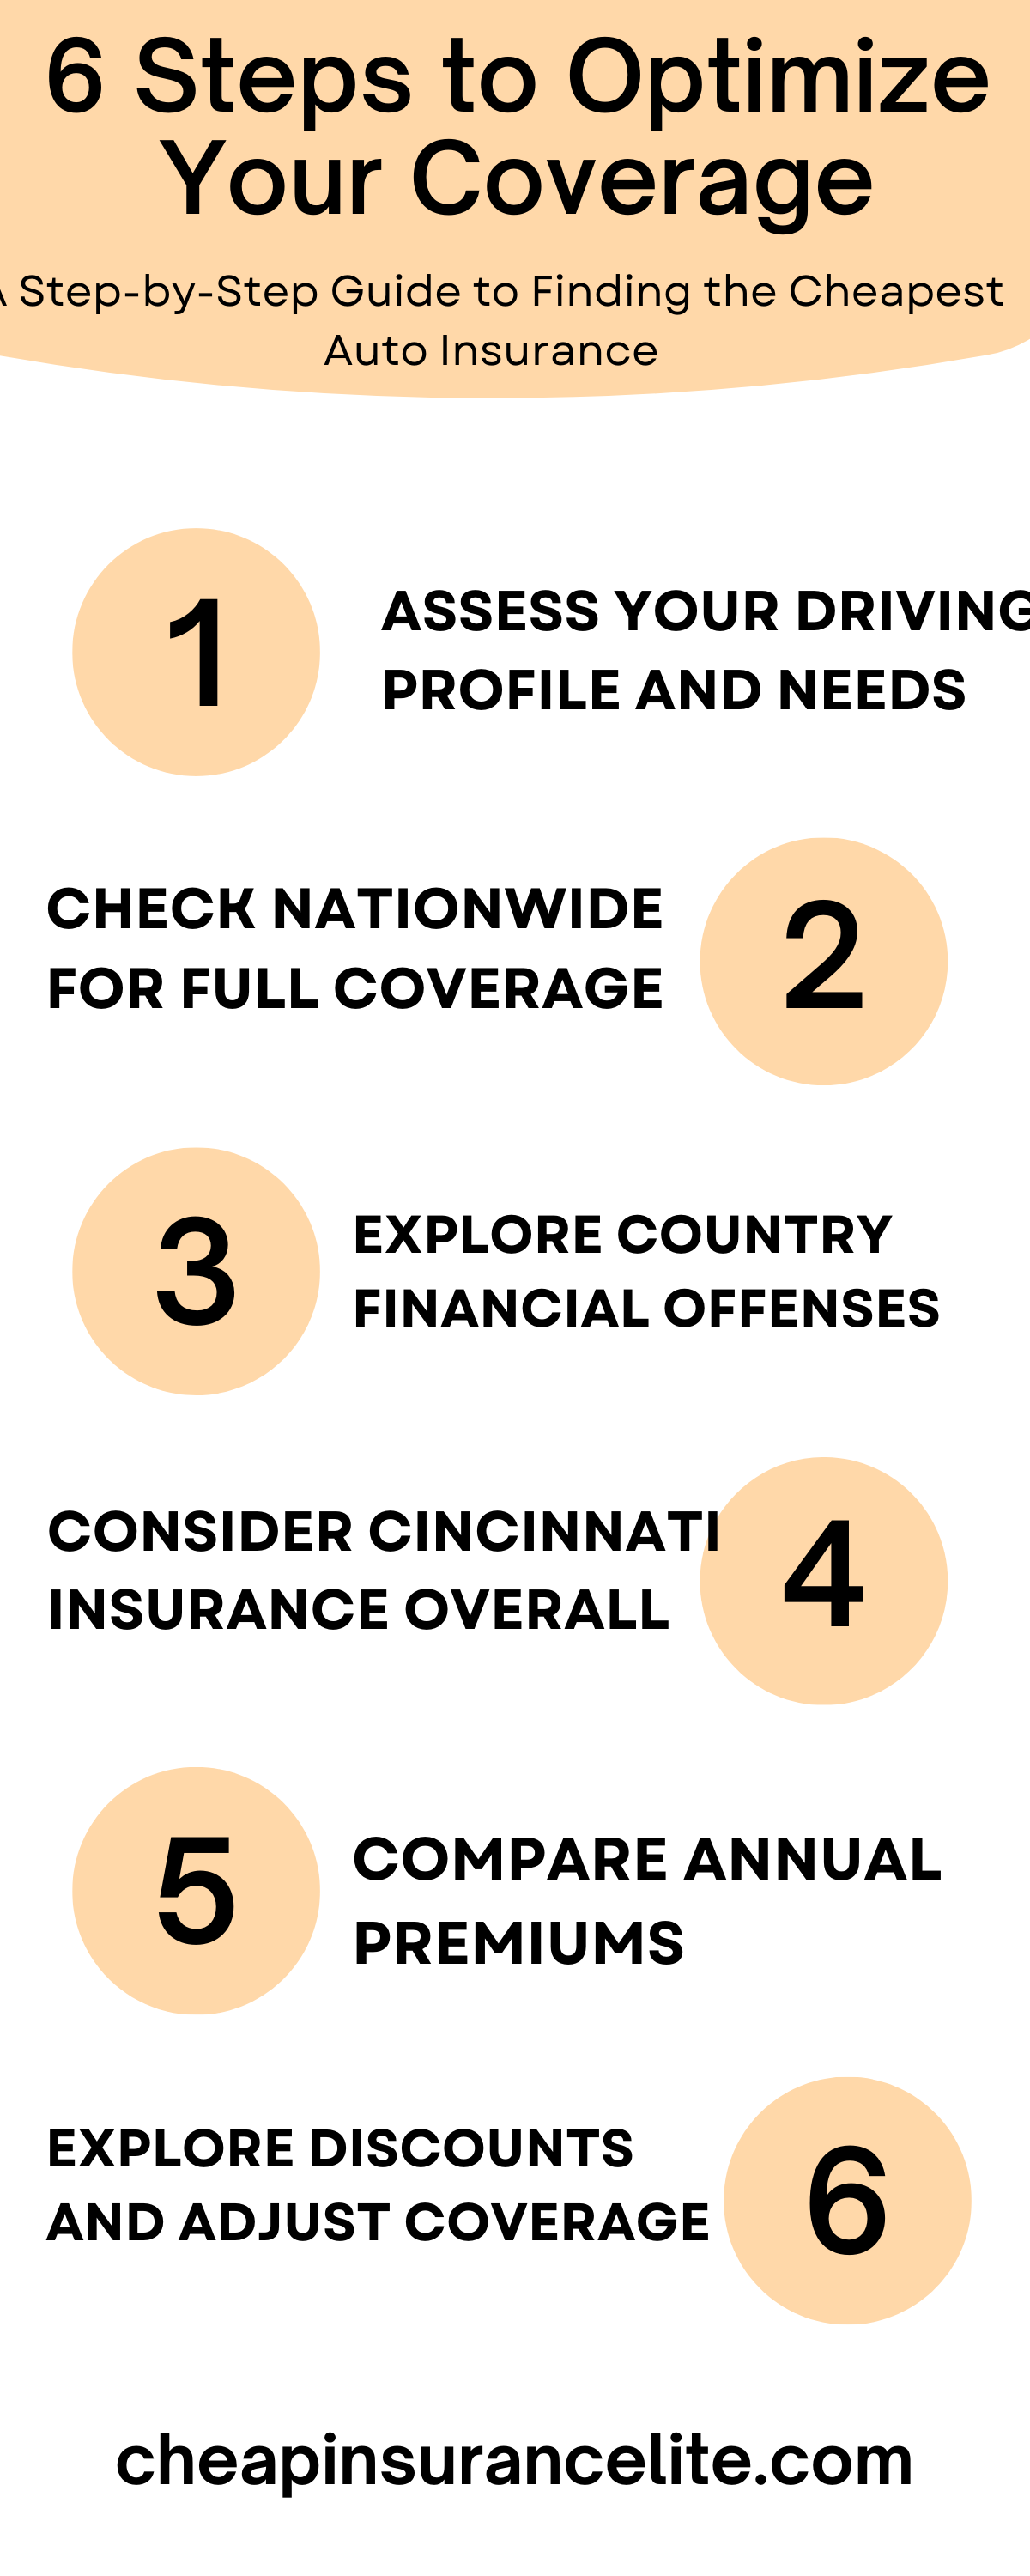 An infographic showing 6 Steps to Optimize Your Coverage